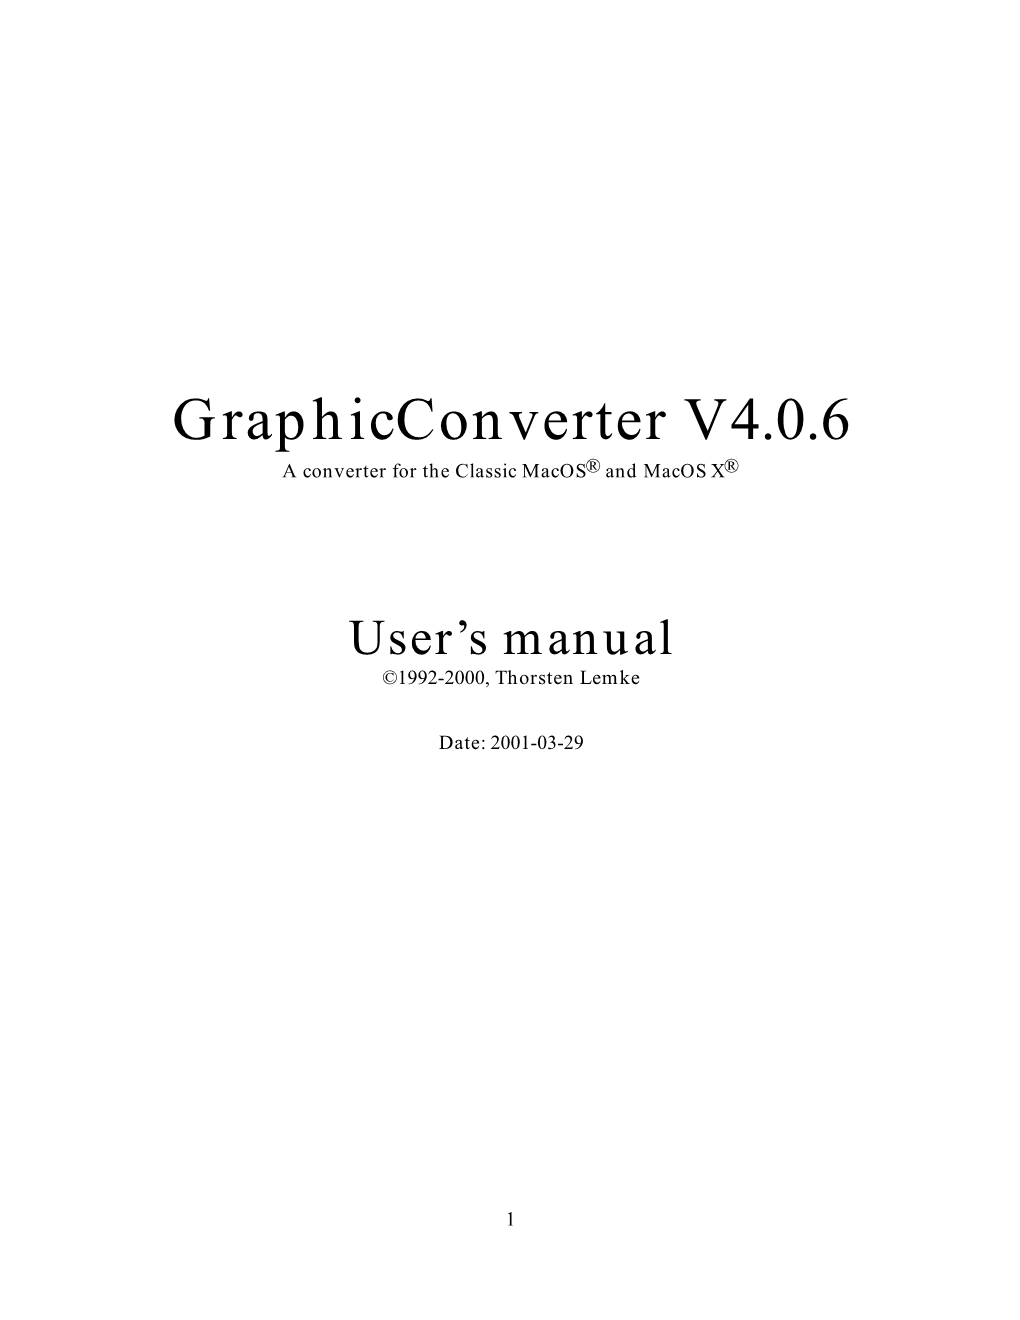 Graphicconverter V4.0.6 a Converter for the Classic Macos® and Macos X®